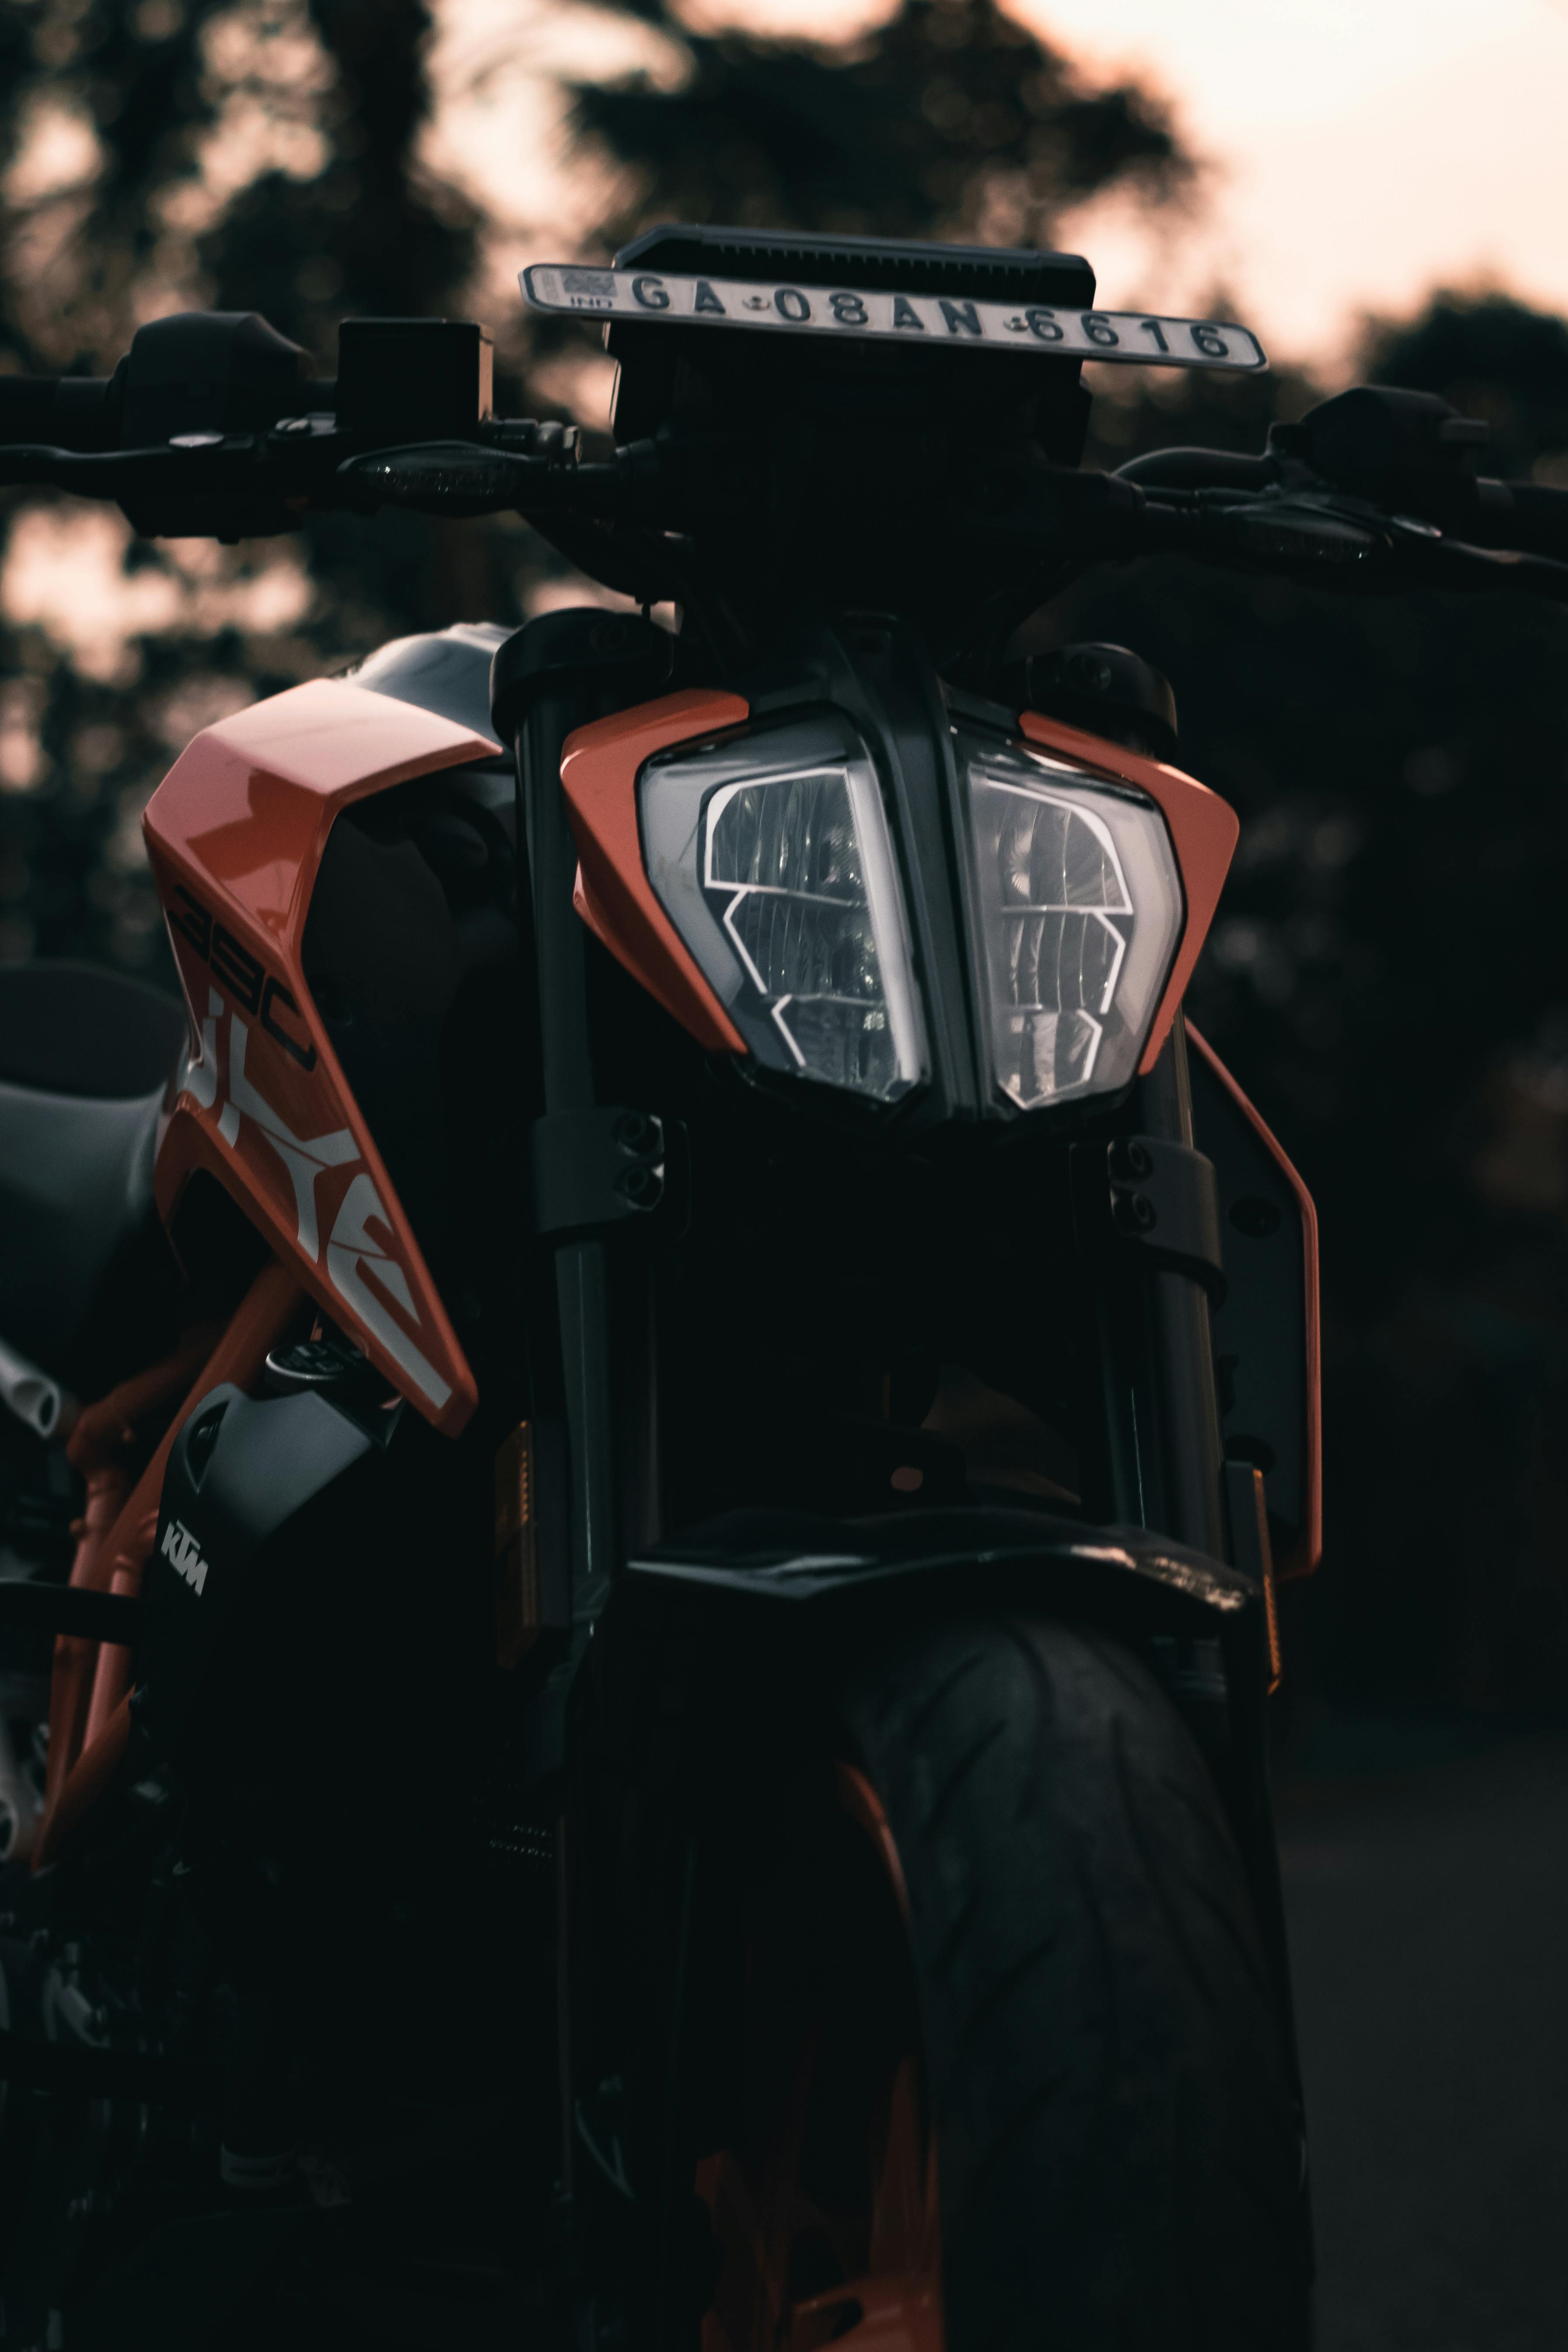 KTM 390 Duke in Close-up Photography · Free Stock Photo